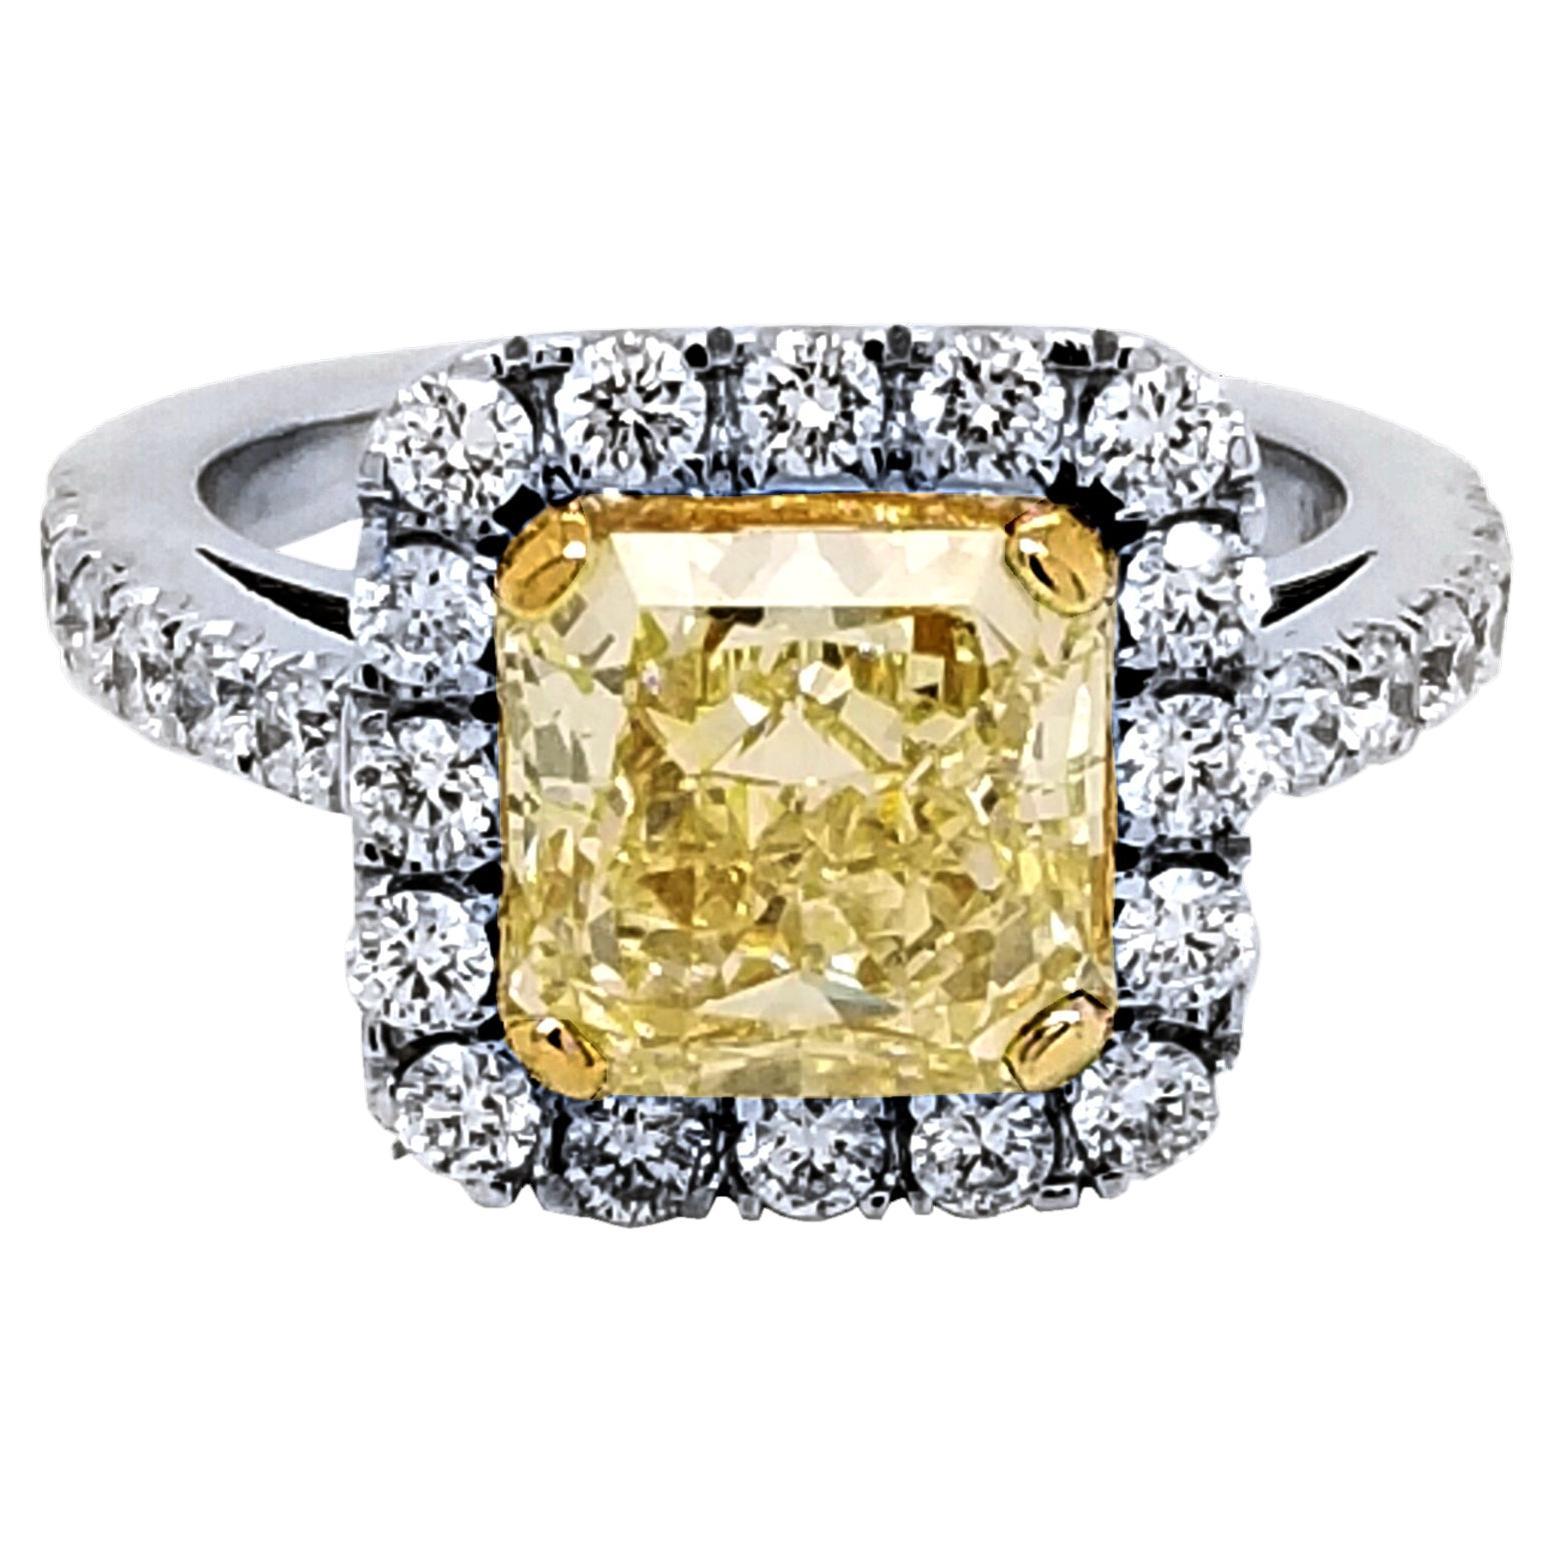 EGL 2.49 Ct Fancy Light Yellow Radiant Pave Set 18K Engagement Ring with Halo For Sale